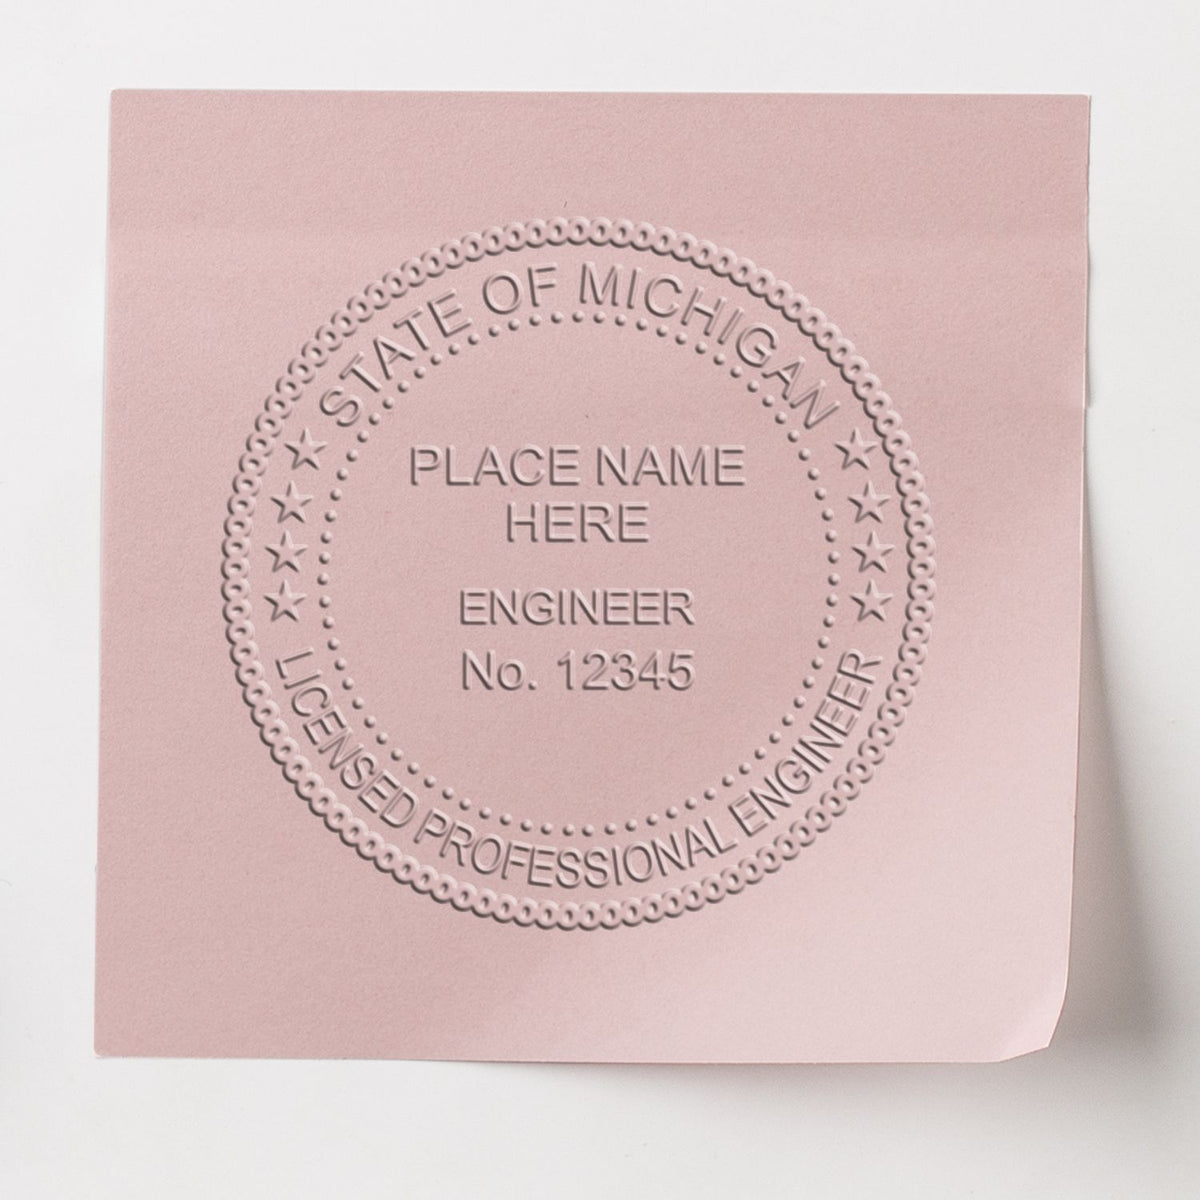 This paper is stamped with a sample imprint of the Soft Michigan Professional Engineer Seal, signifying its quality and reliability.